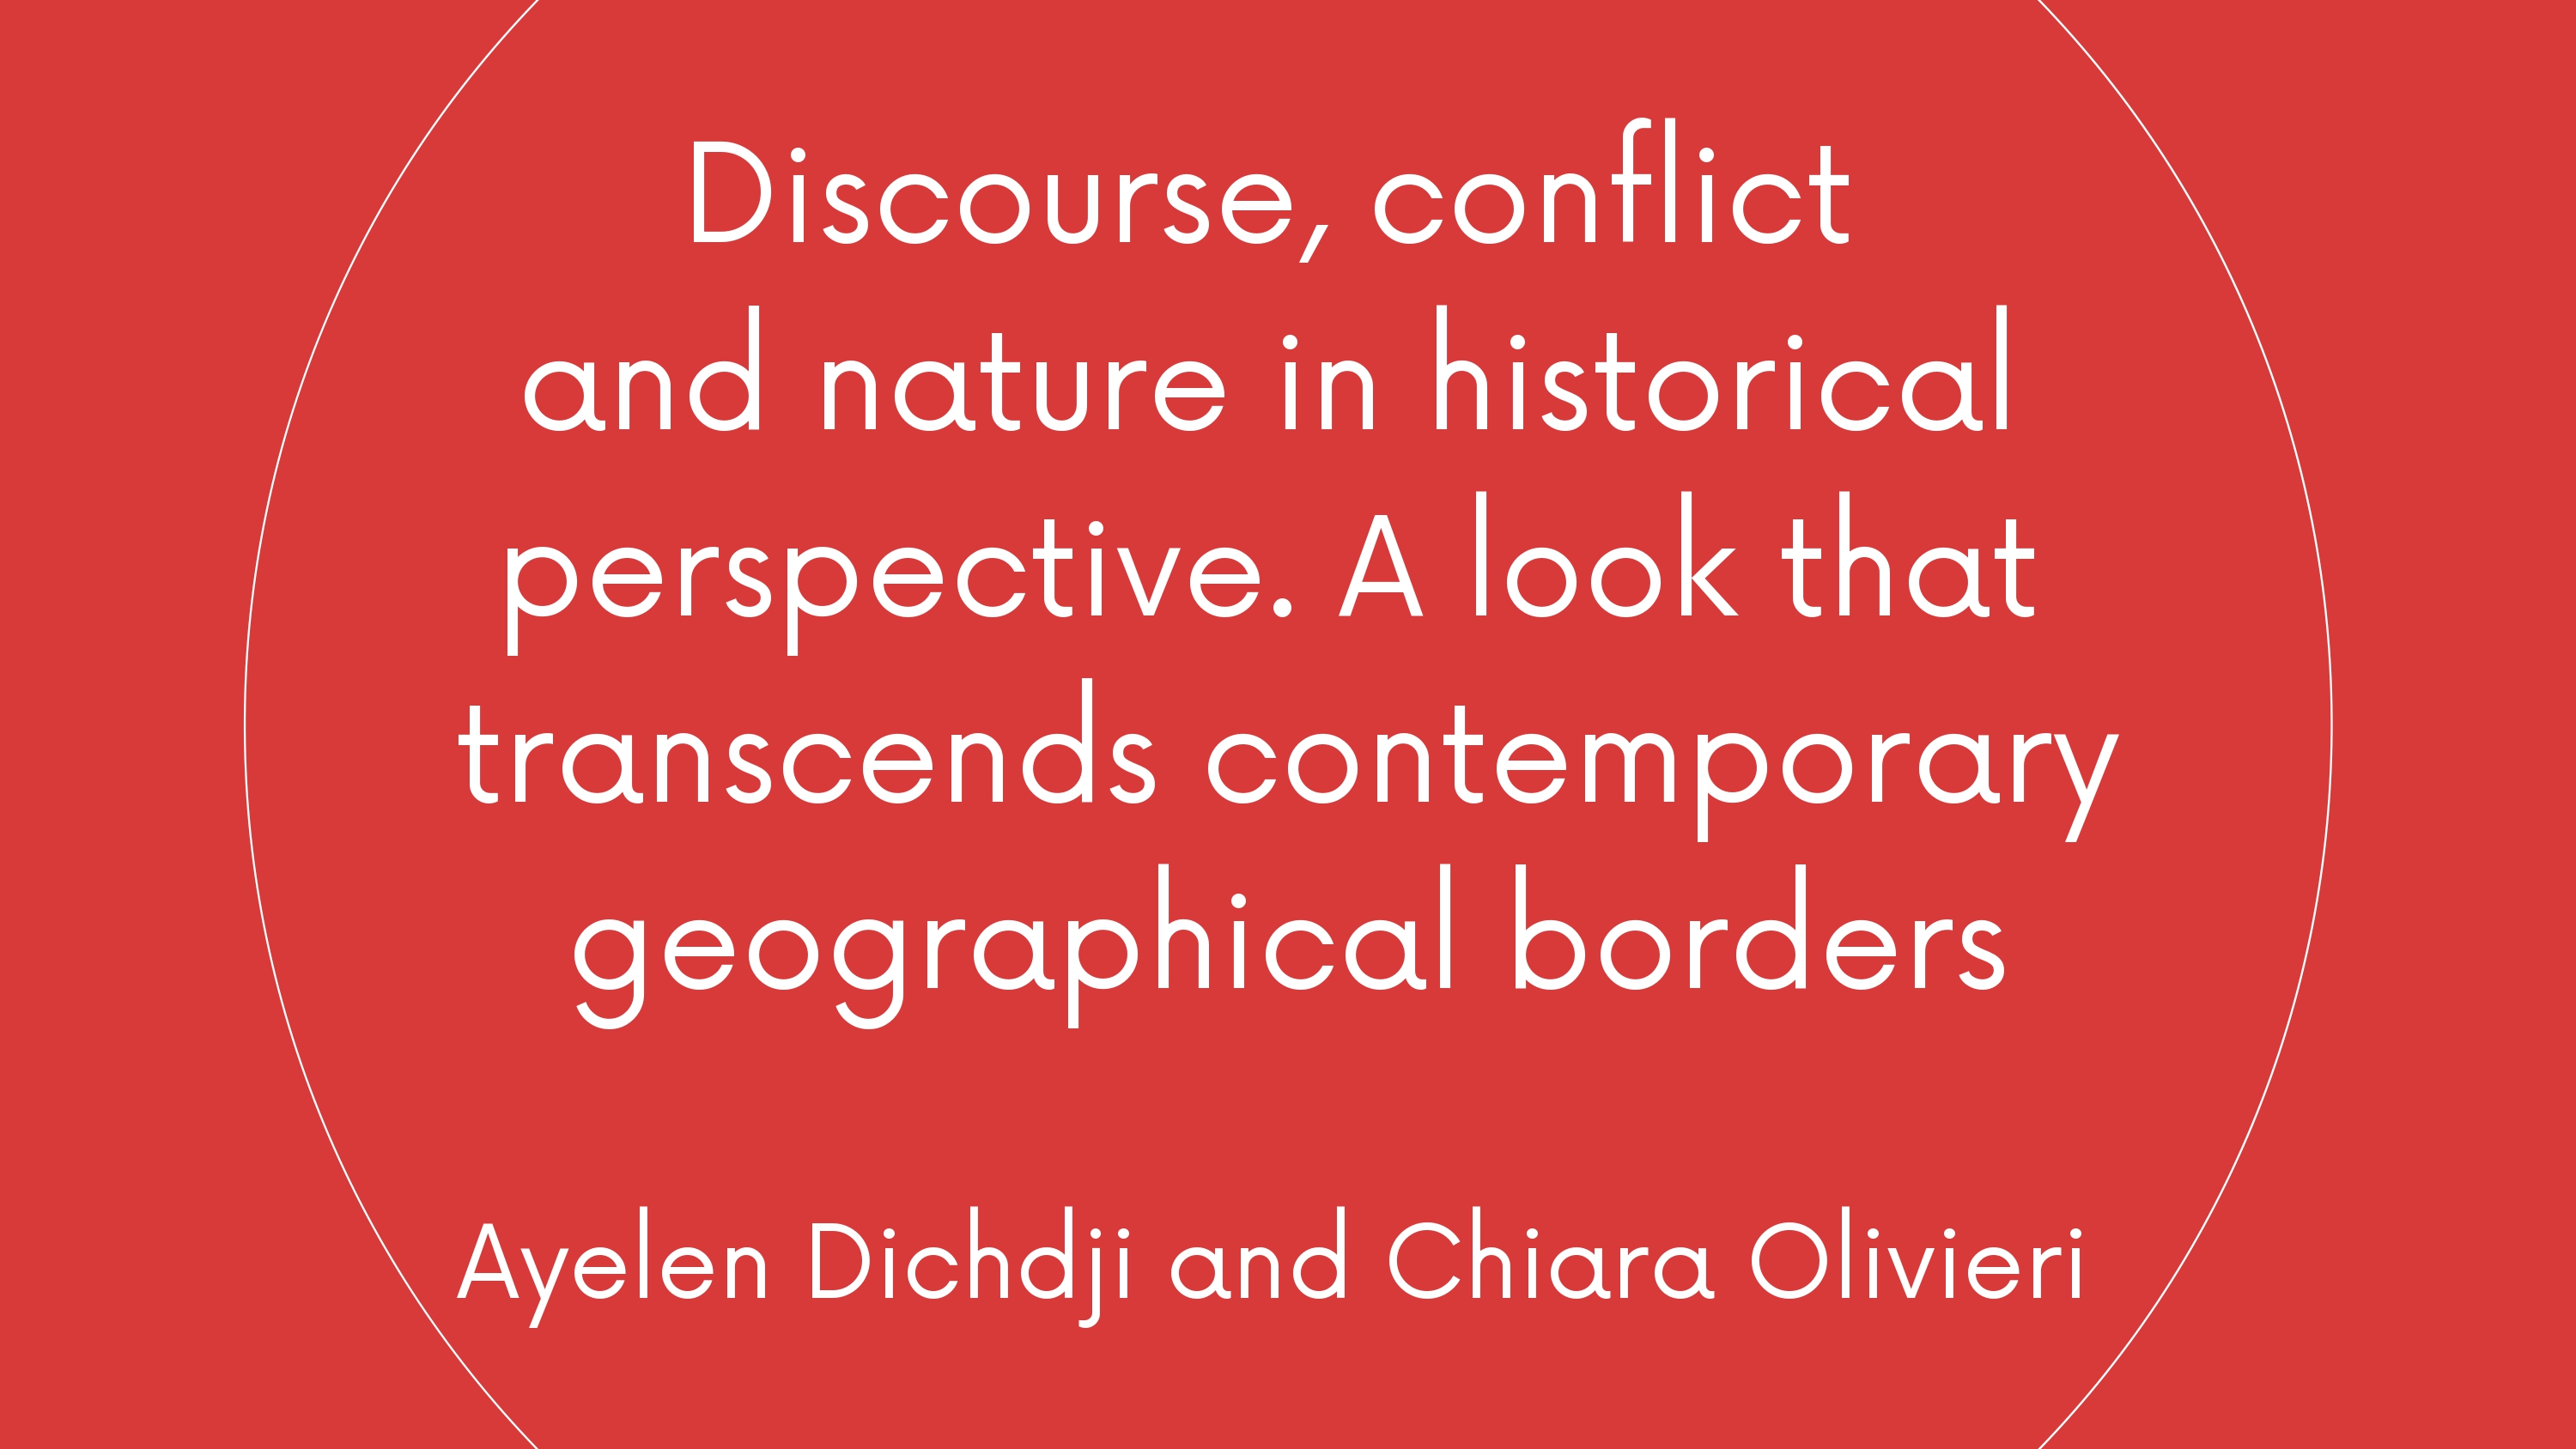 Discourse, conflict and nature in historical perspective. A look that transcends contemporary geographical borders